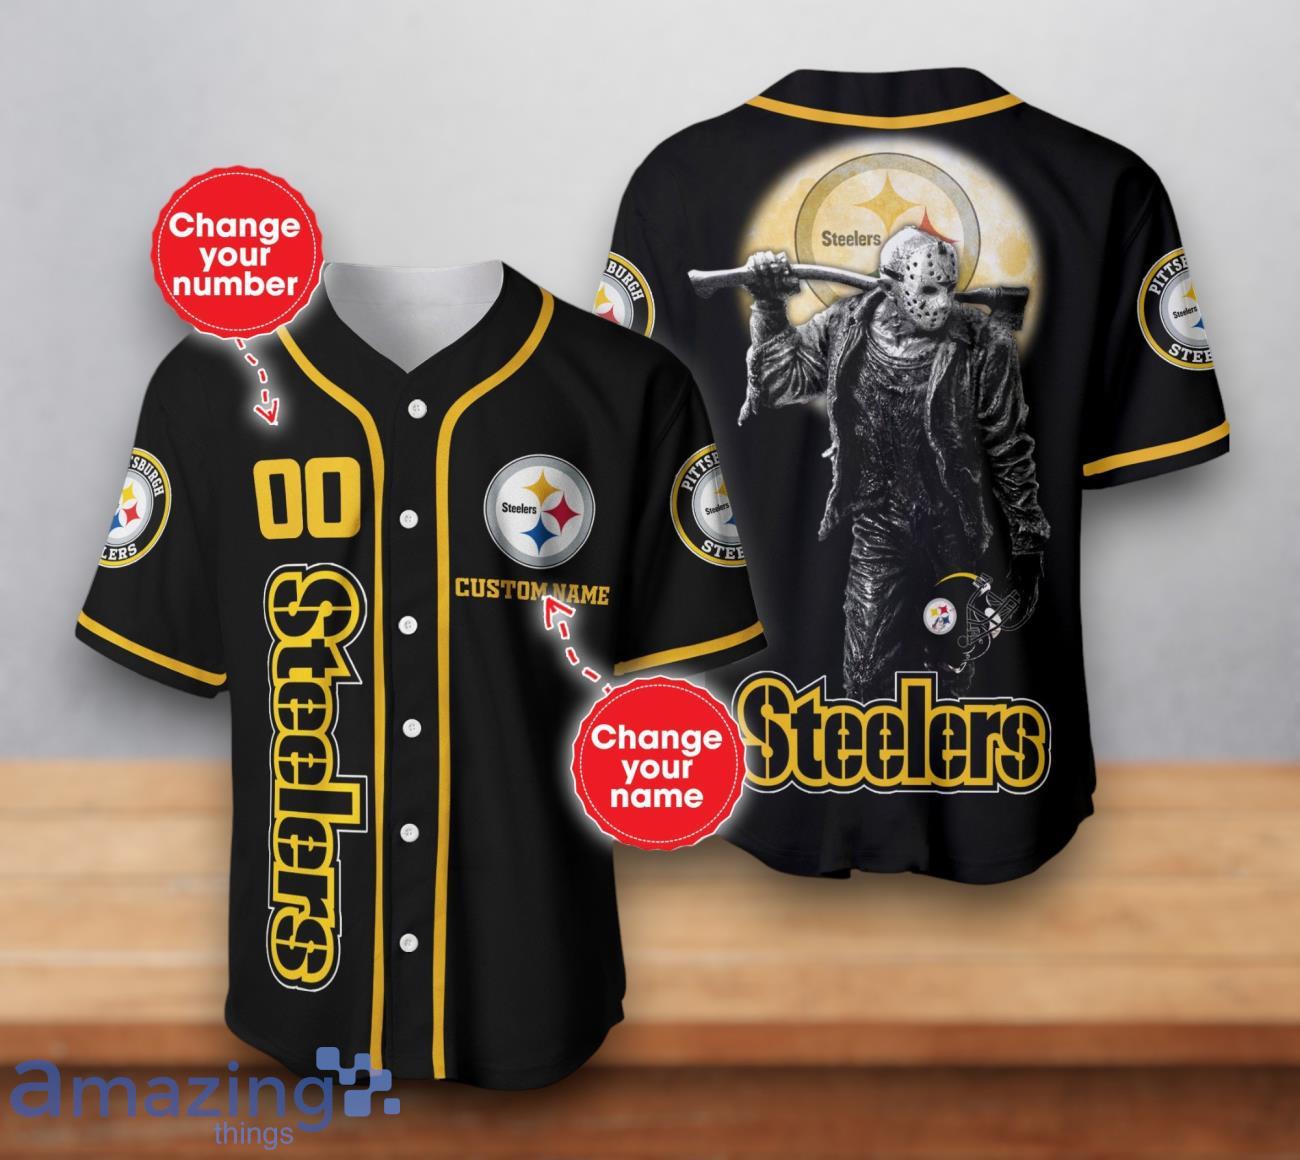 Pittsburgh Steelers NFL Custom Number & Name Baseball Jersey For Fans Product Photo 1